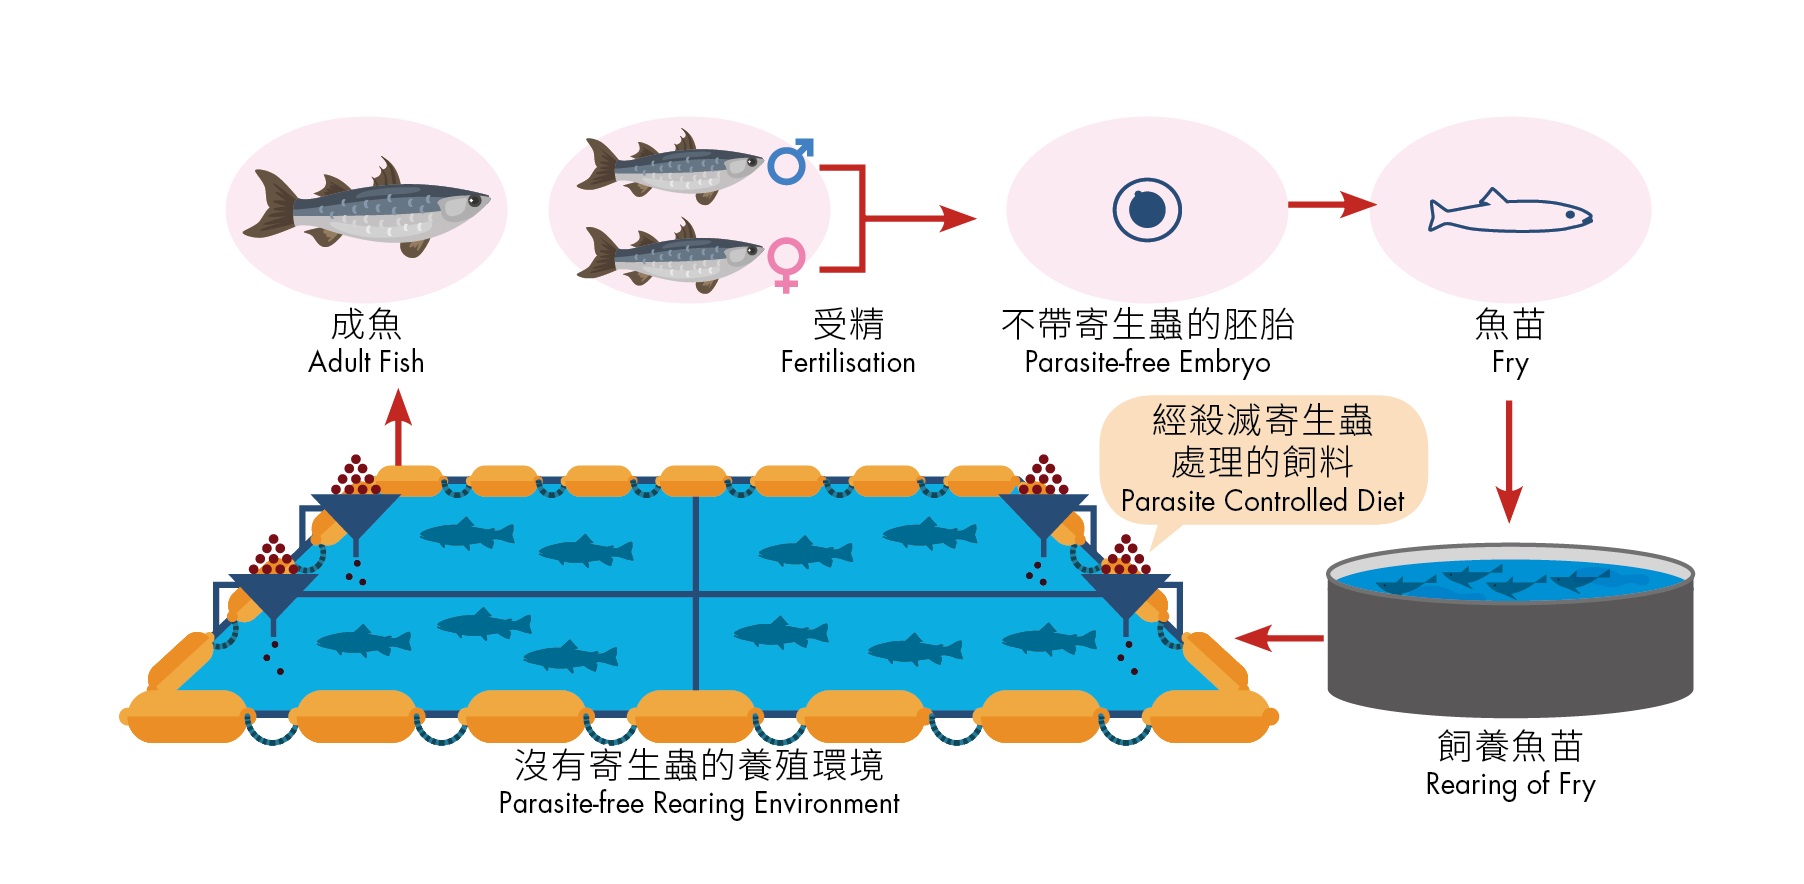 Good aquaculture practices help reduce the risk of parasitic infestation